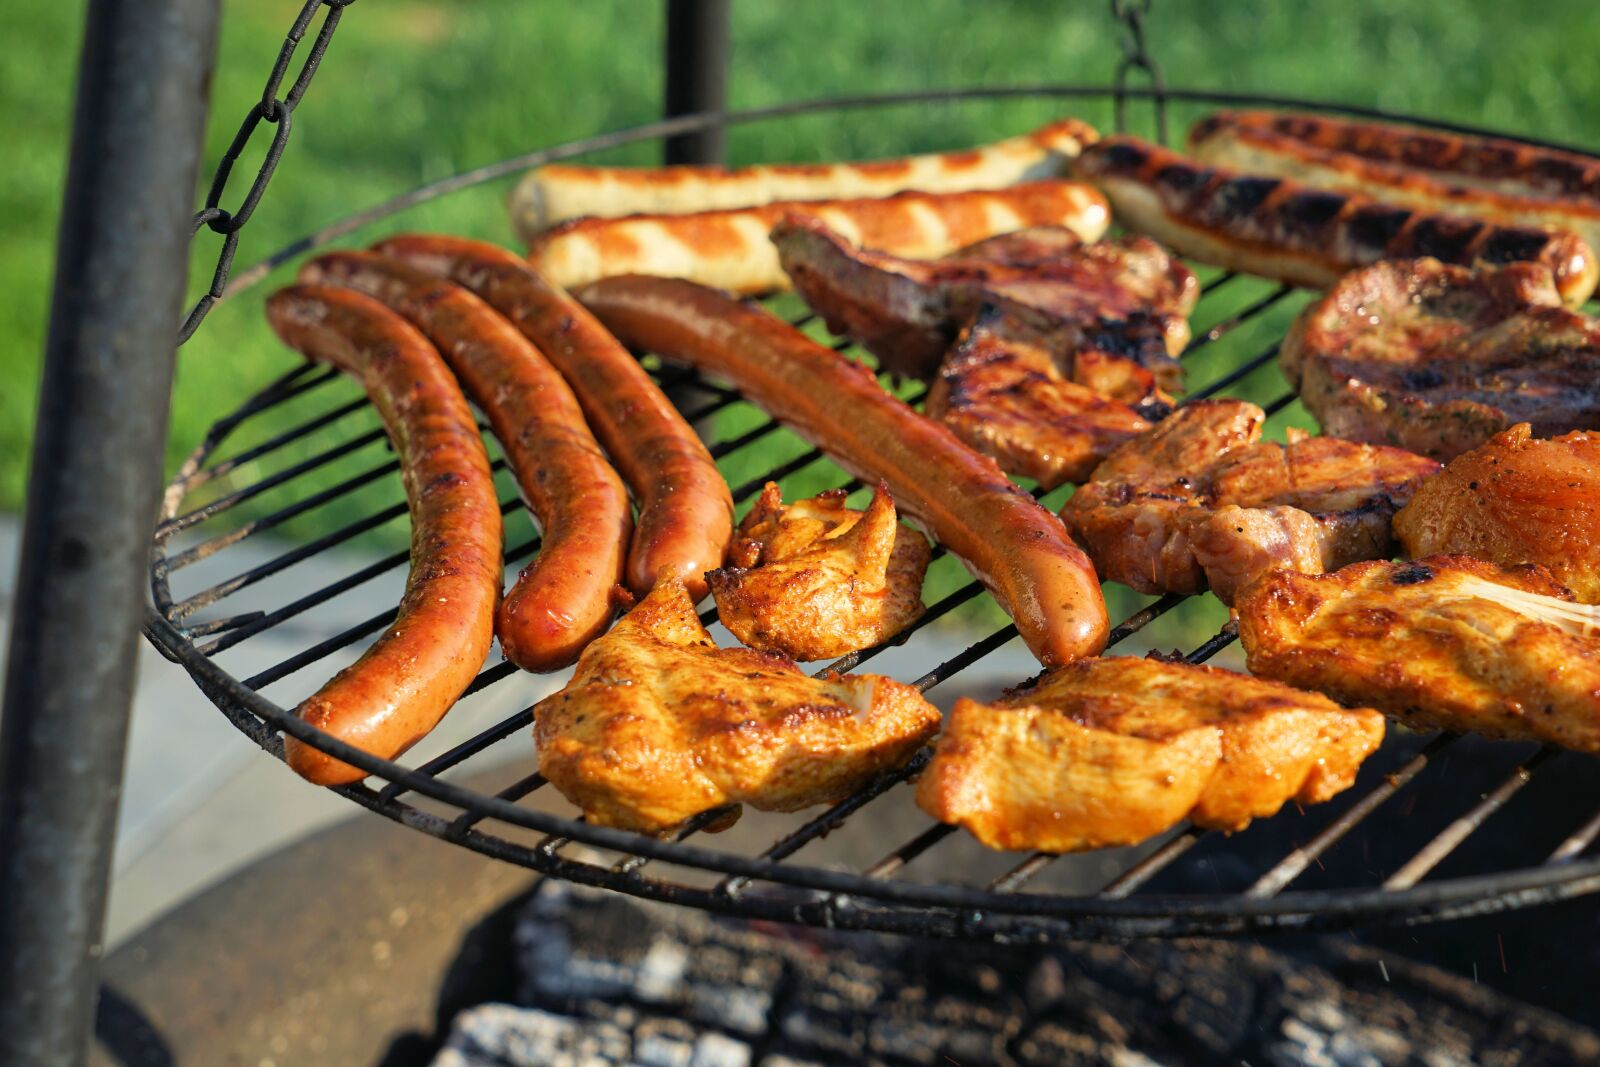 Sony a7 II sample photo. Barbecue, grill, grilled meats photography